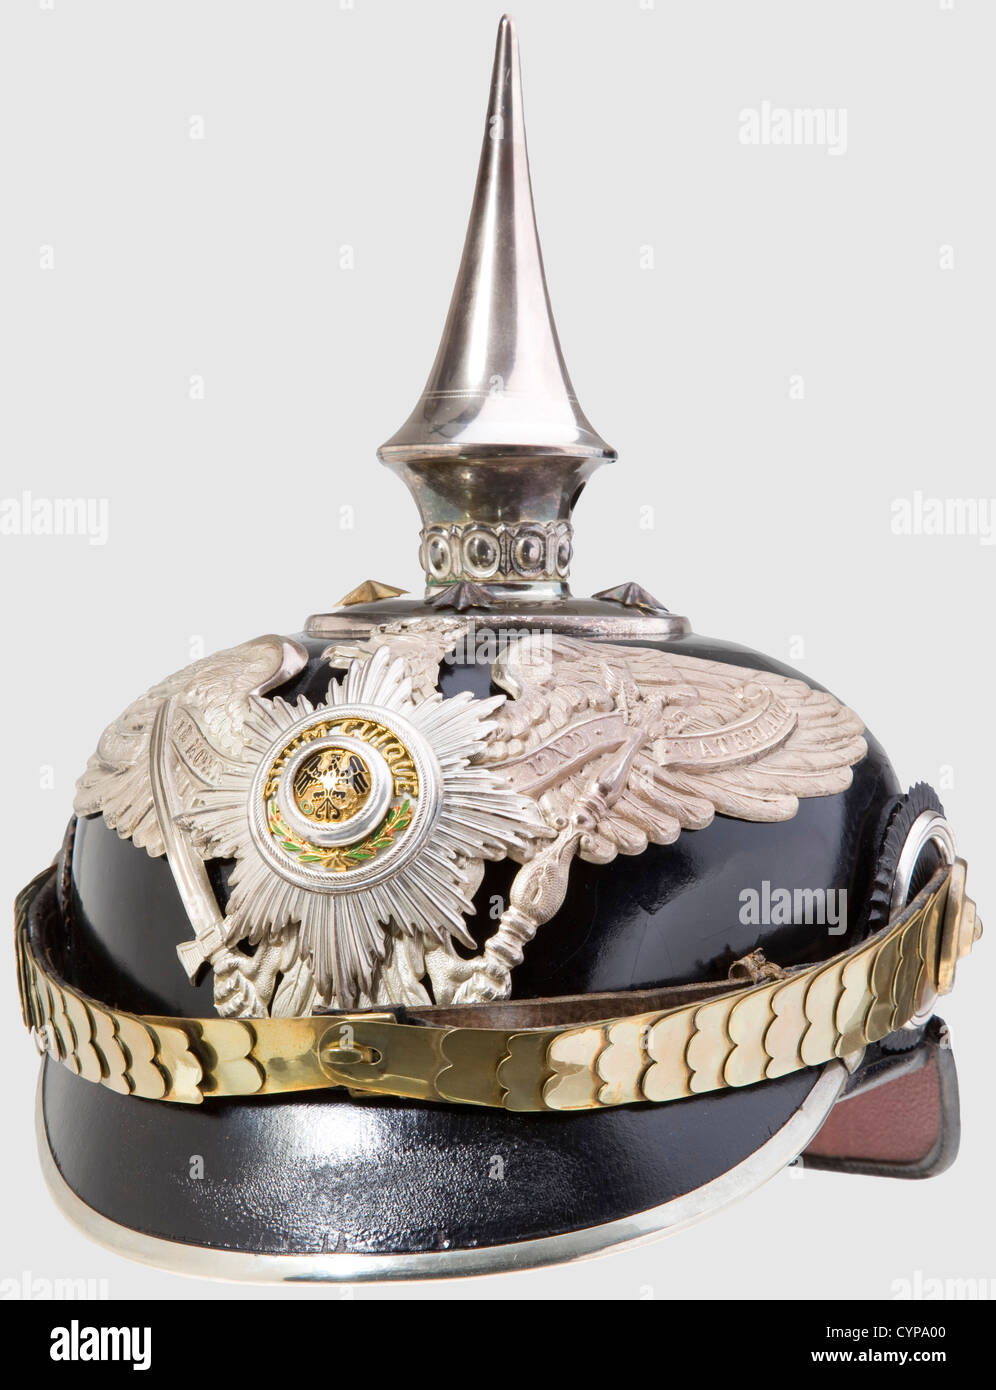 A helmet for officers,of the 5th Foot Guard Regiment in Spandau or the Guard Fusilier Regiment in Berlin,in the style of wear from 1897 with both cockades. Heavily vaulted,frosted silver guard eagle with applied enamel star of the Order of the Black Eagle,smooth screw-on spike on circular plate affixed with star screws. Flat,yellow chinscales on rosettes with two cockades,silver visor edging and rear rail,green ribbed silk liner,brown leather sweat band. The visor liner is green in front,red in back. Hairline lacquer cracks,overall a well-preserved,e,Additional-Rights-Clearences-Not Available Stock Photo